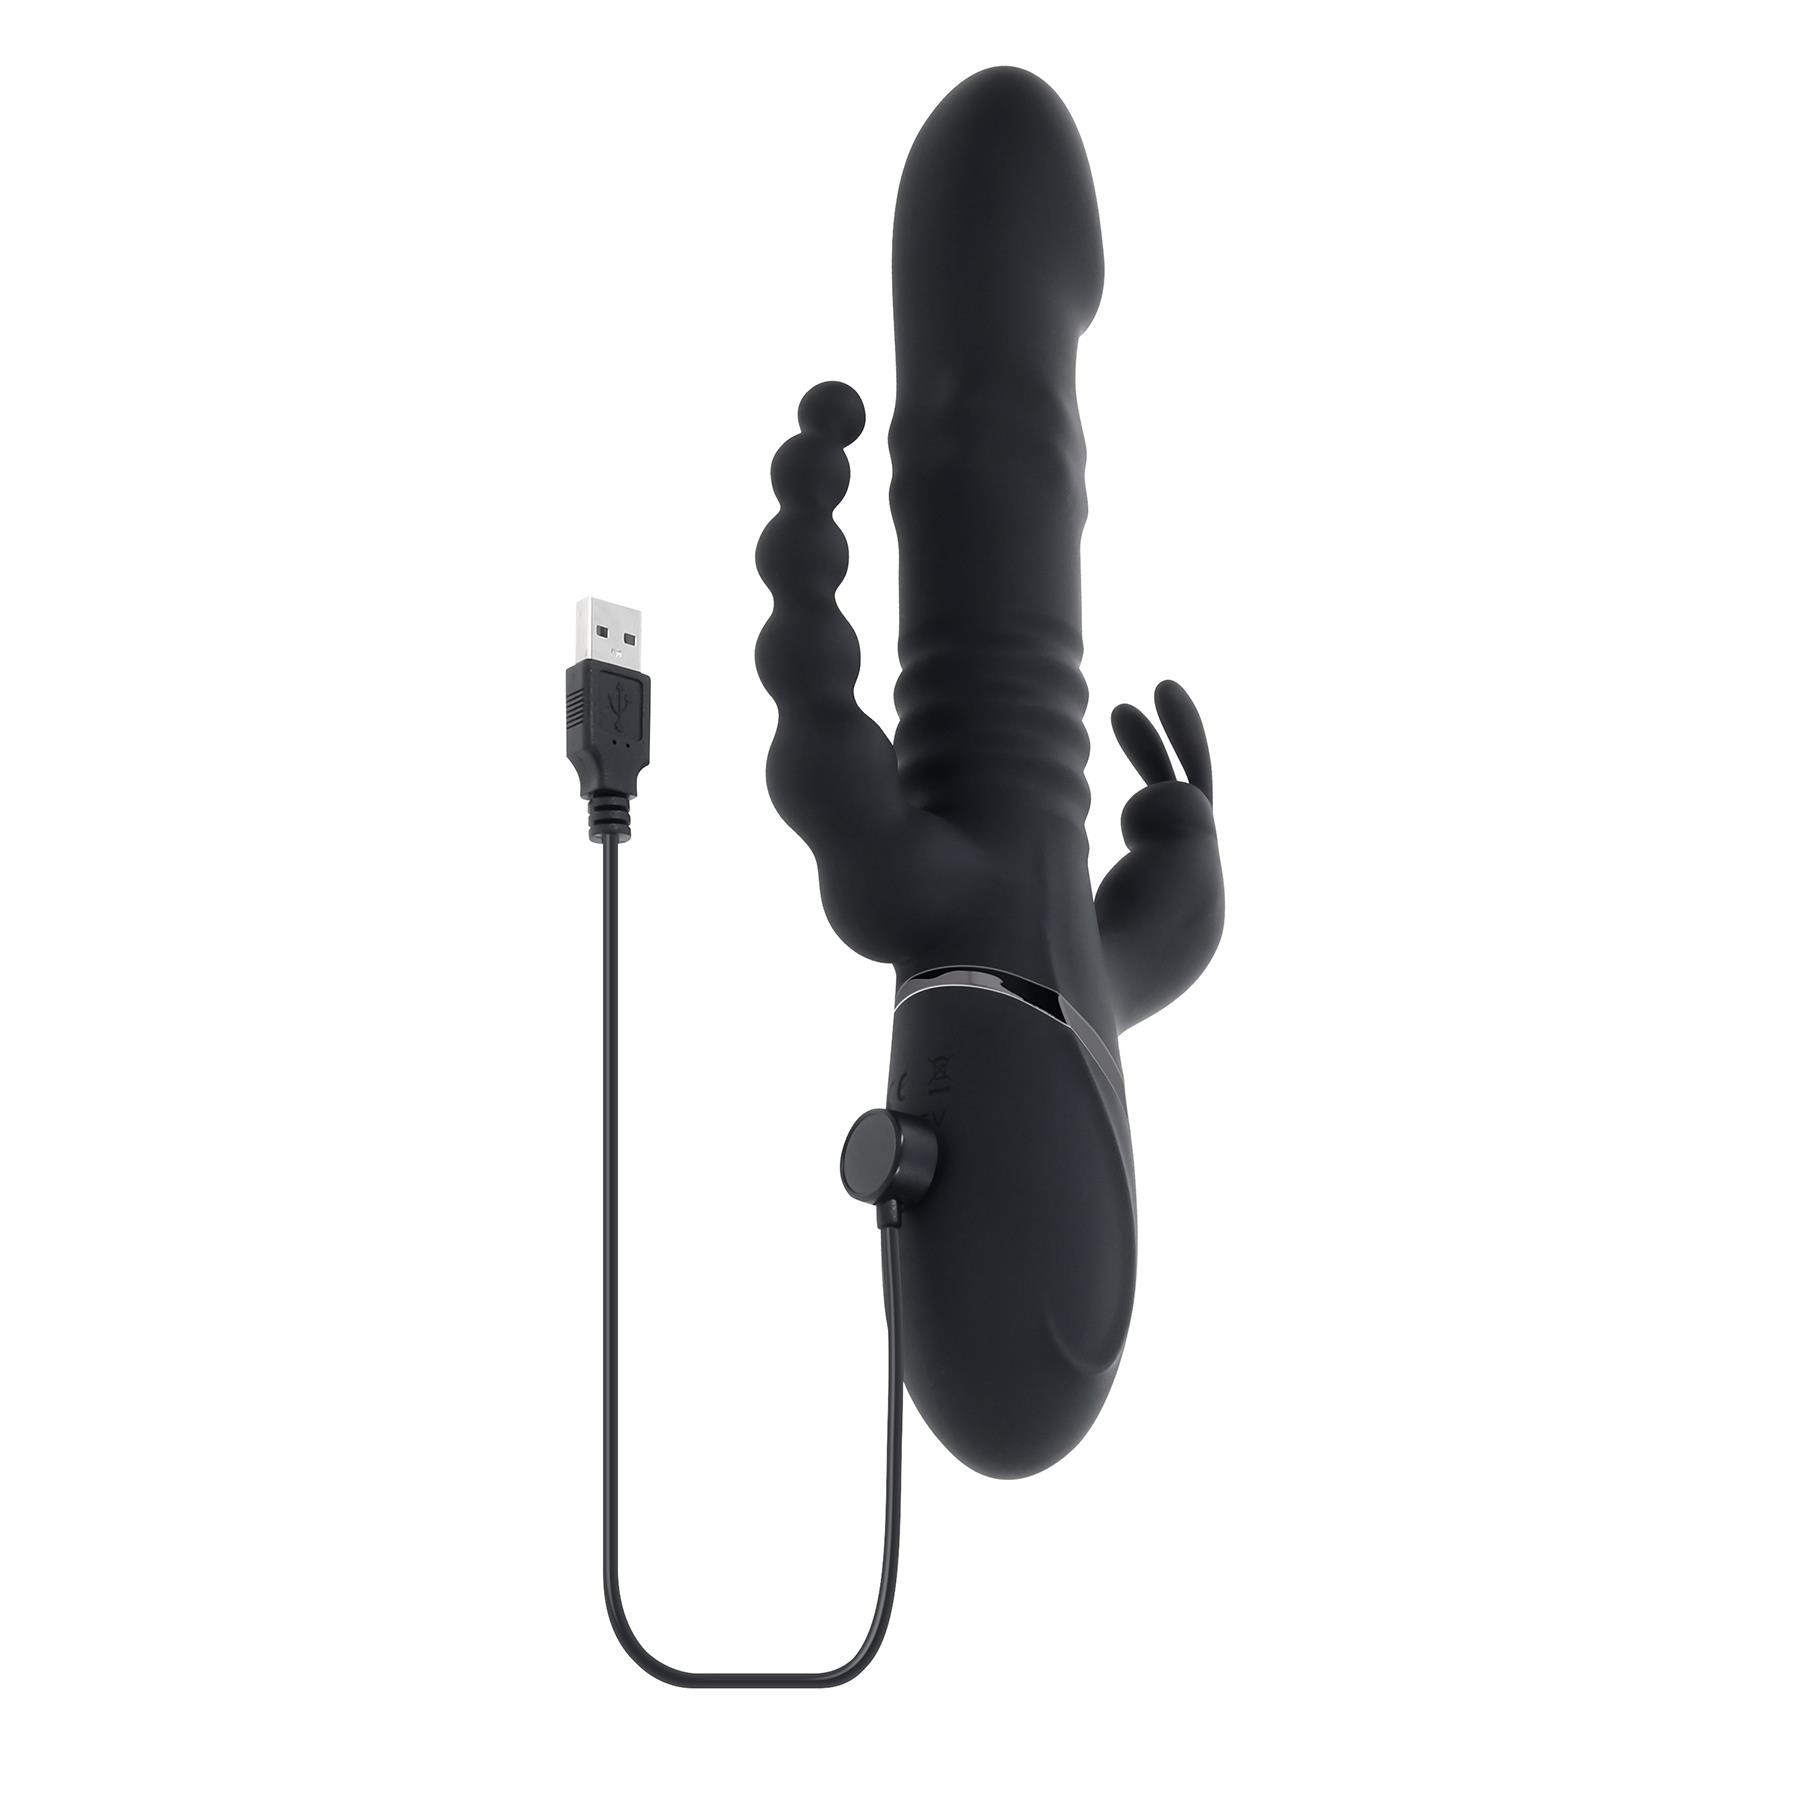 Playboy Pleasure Big Bunny Energy Triple Stimulator - Product Shot With Charging Cable